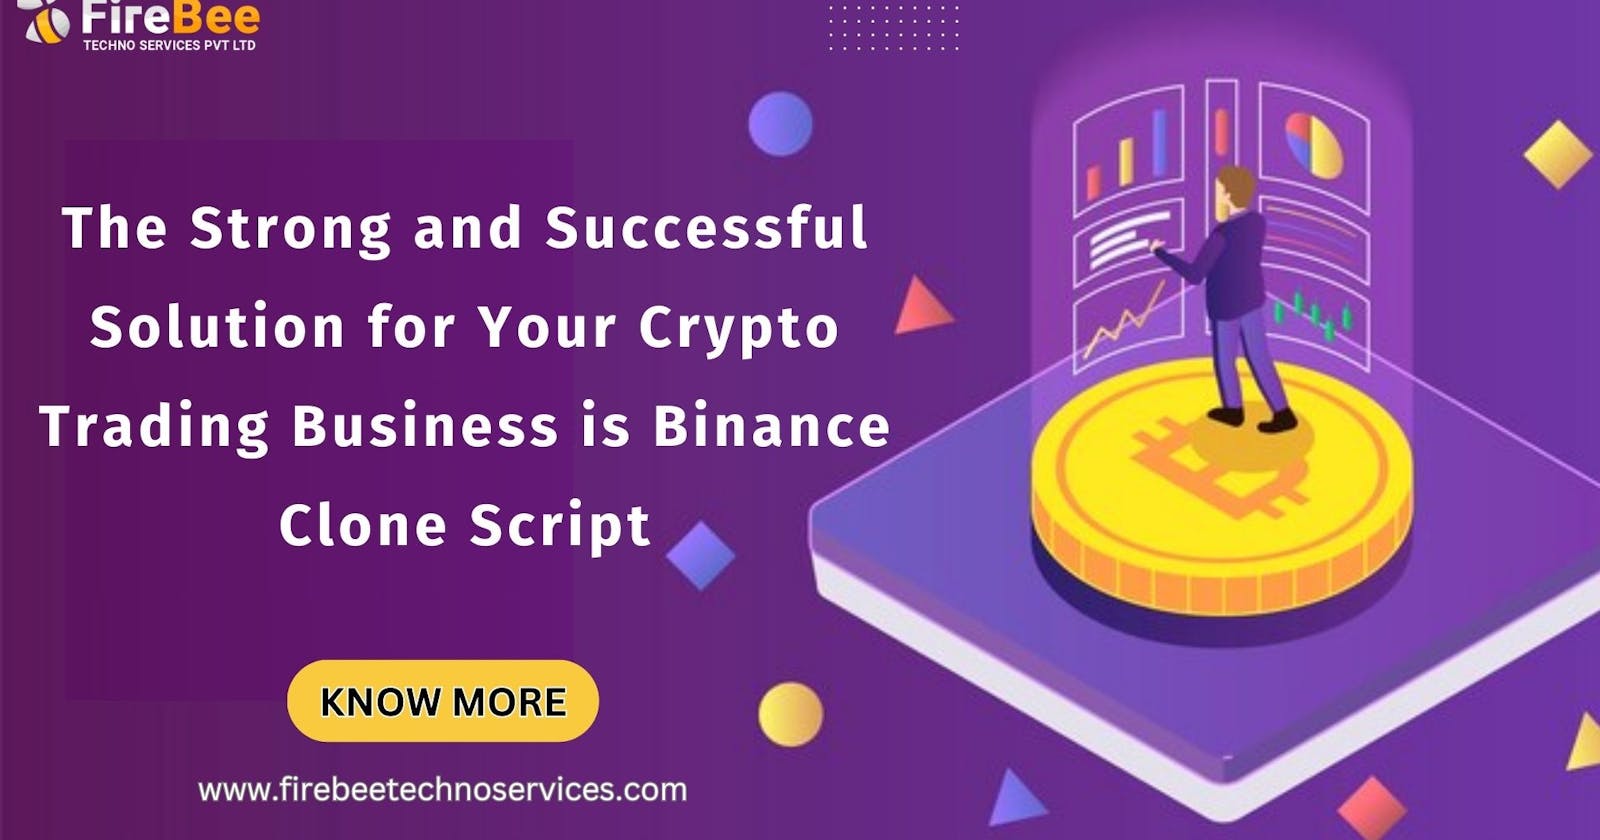 The Strong and Successful Solution for Your Crypto Trading Business is Binance Clone Script